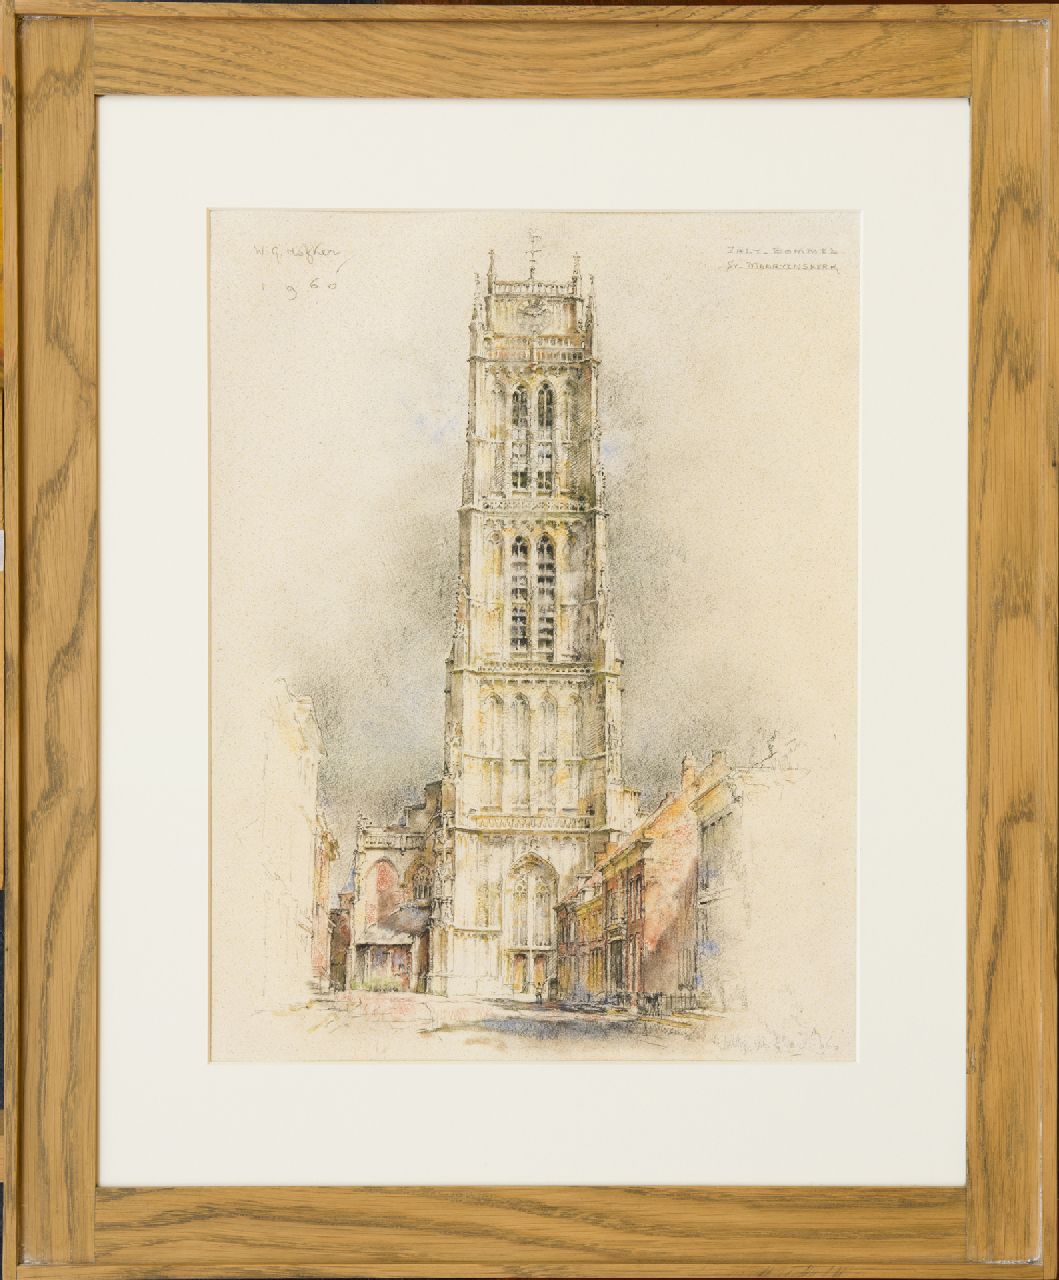 Hofker W.G.  | Willem Gerard Hofker | Watercolours and drawings offered for sale | A view of the Sint-Maartenskerk, Zaltbommel, black and coloured chalk on paper 43.2 x 33.0 cm, signed u.l. and l.r. and dated 1960